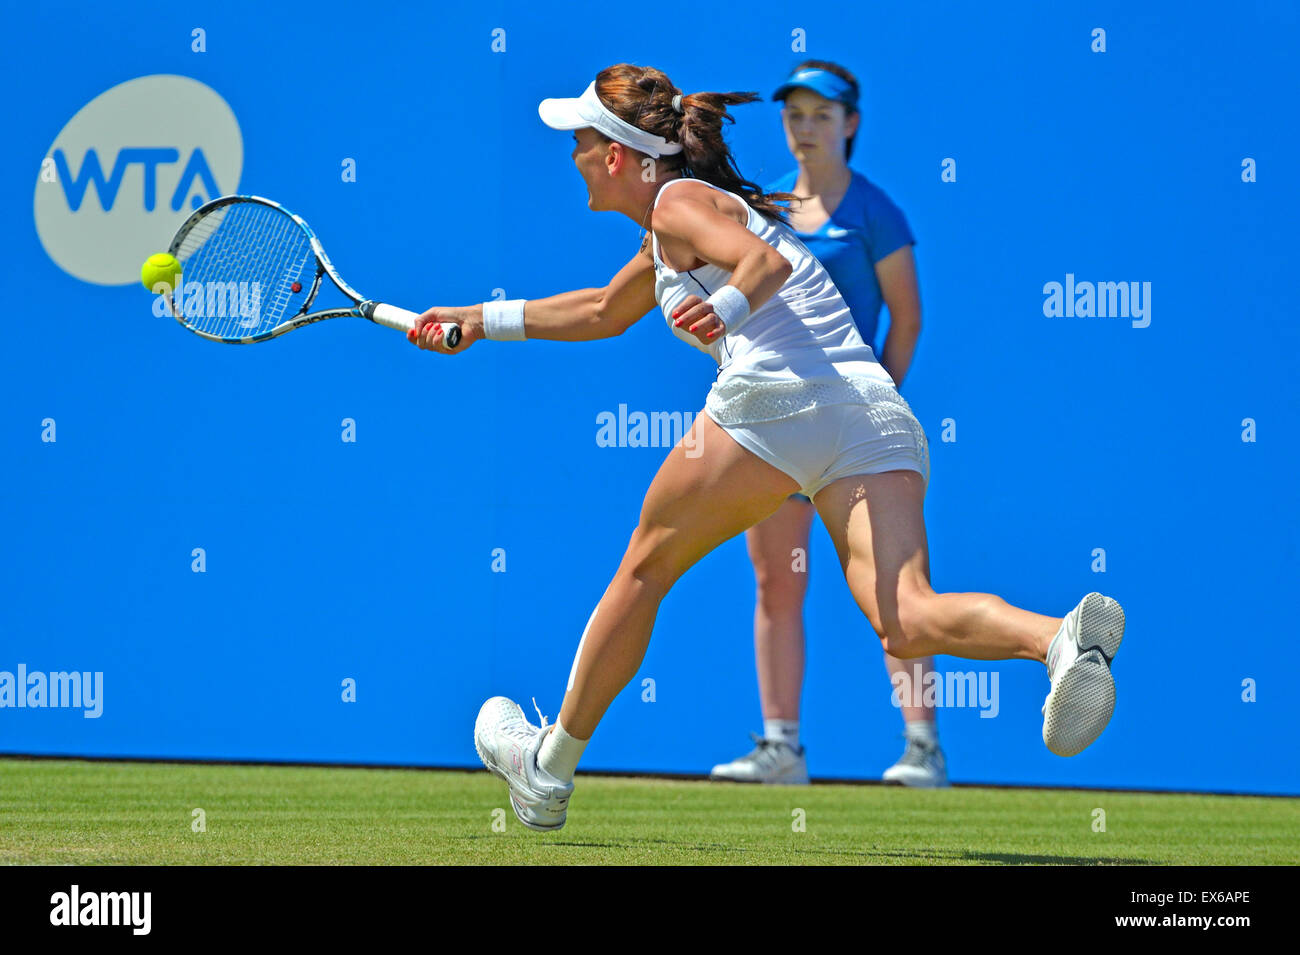 Agnieszka Radwanska (Poland) during her defeat in the final at the Aegon International, Eastbourne, 24 June 2015 Stock Photo